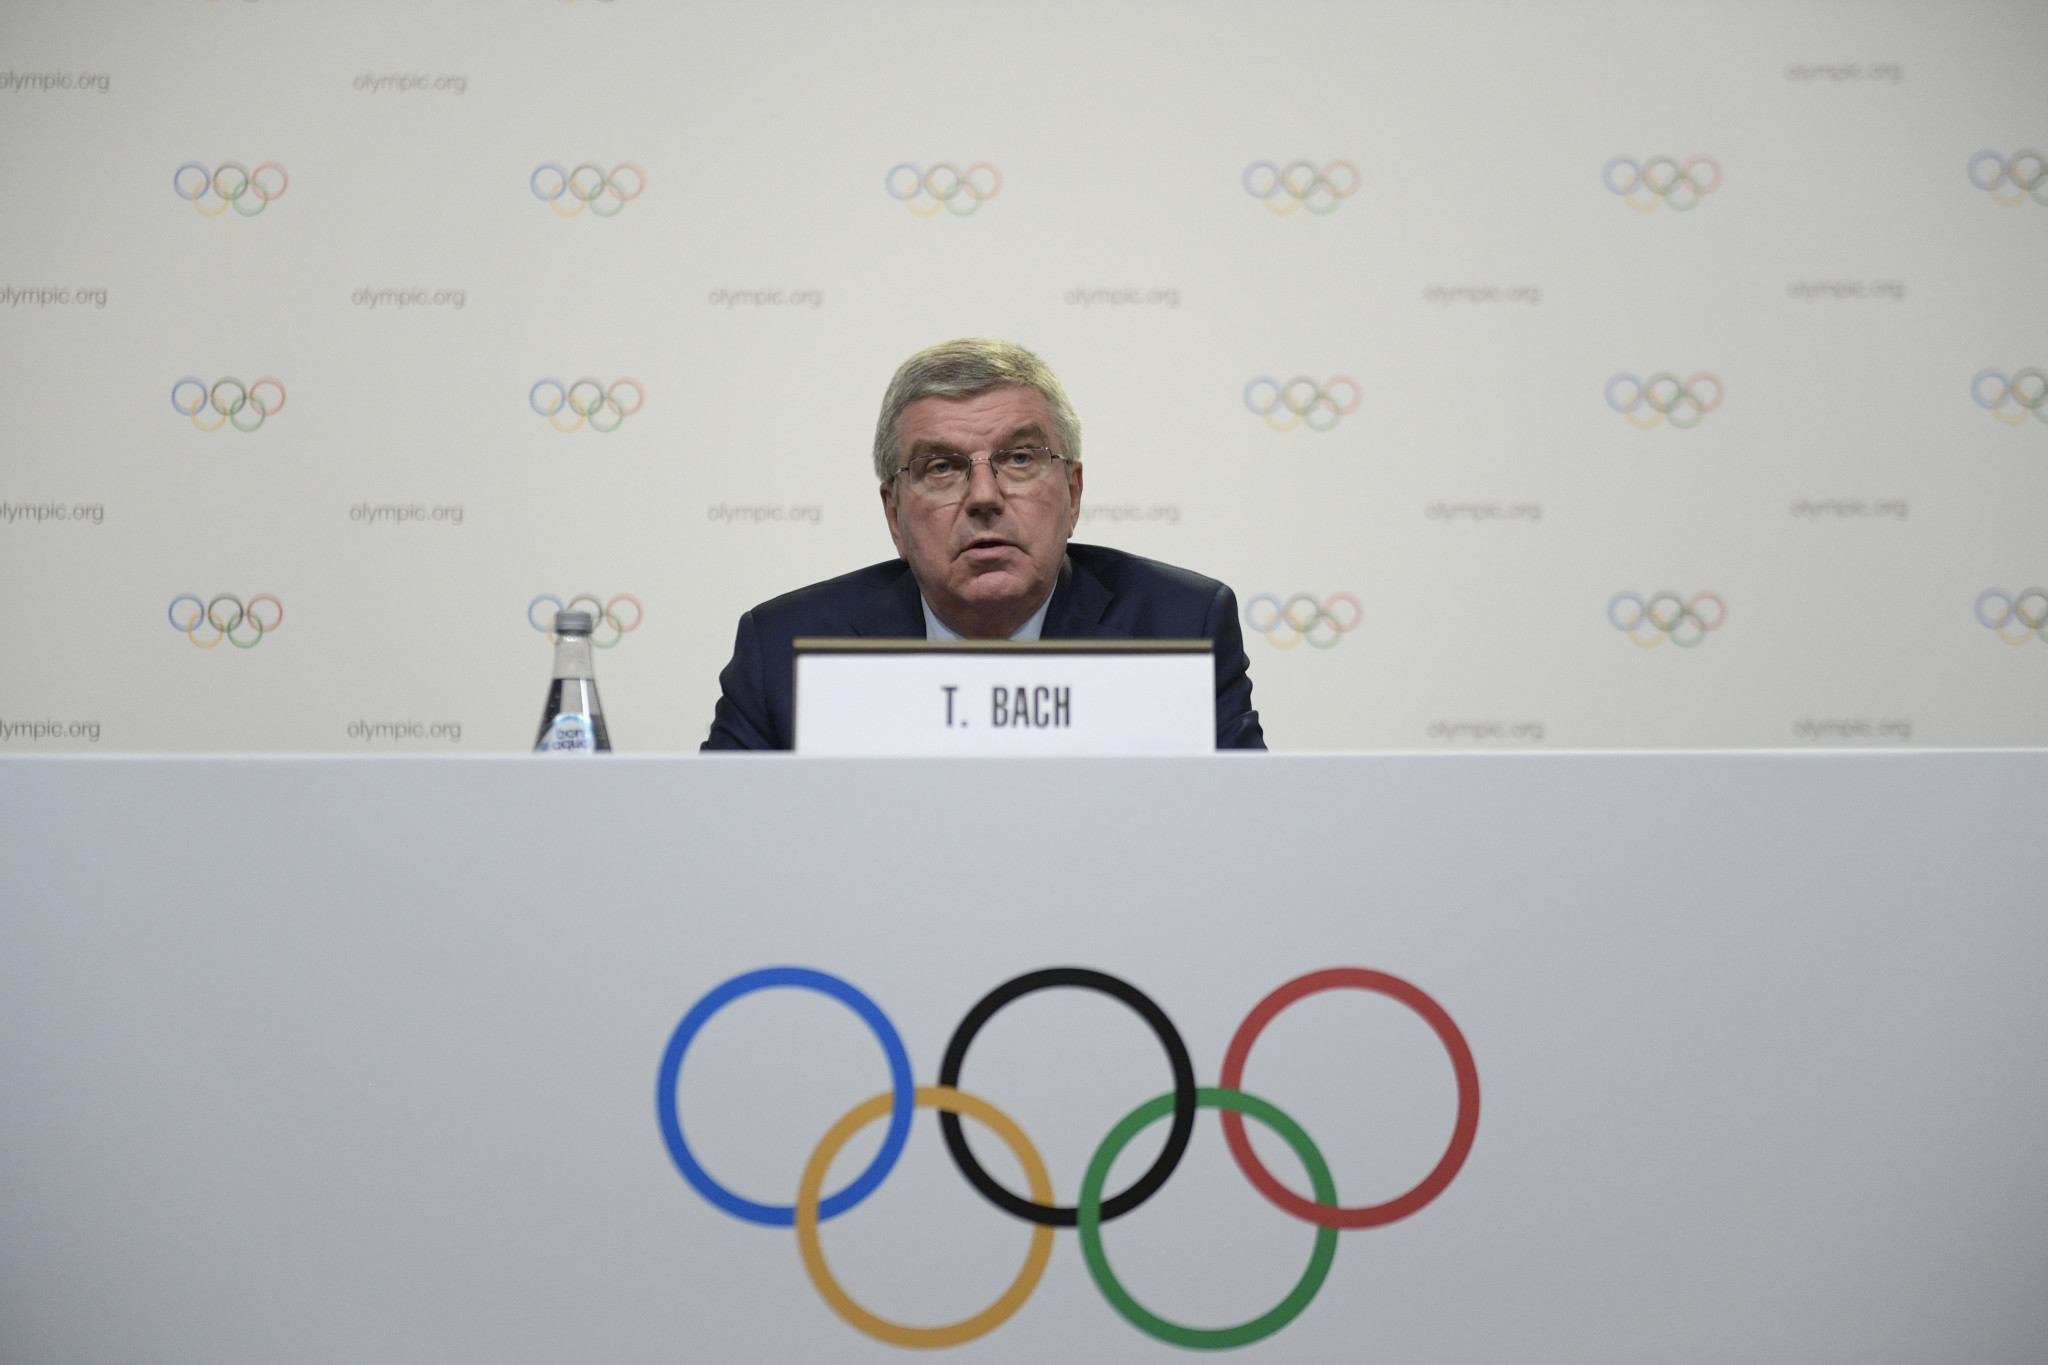 IOC President Thomas Bach has talked up Milan-Cortina d'Ampezzo's chances ©Getty Images